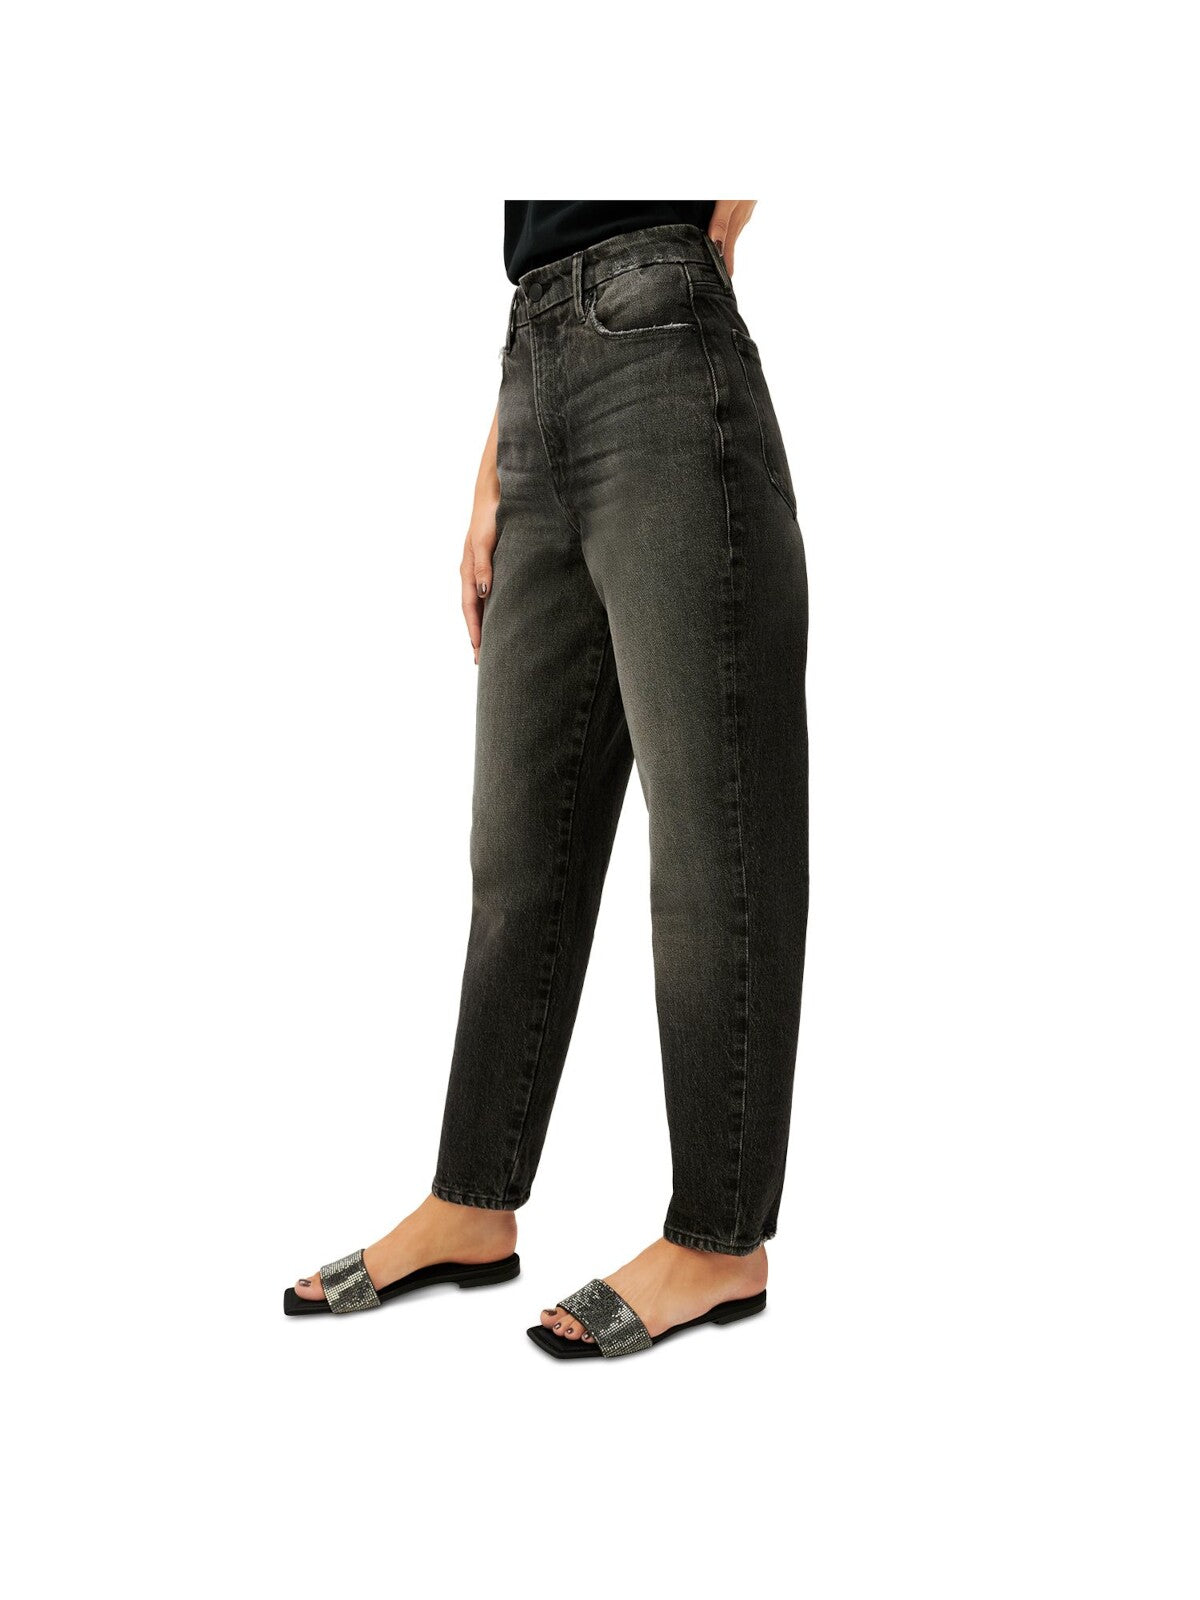 GOOD AMERICAN Womens Zippered Pocketed Tapered Fit Ankle Length High Waist Jeans